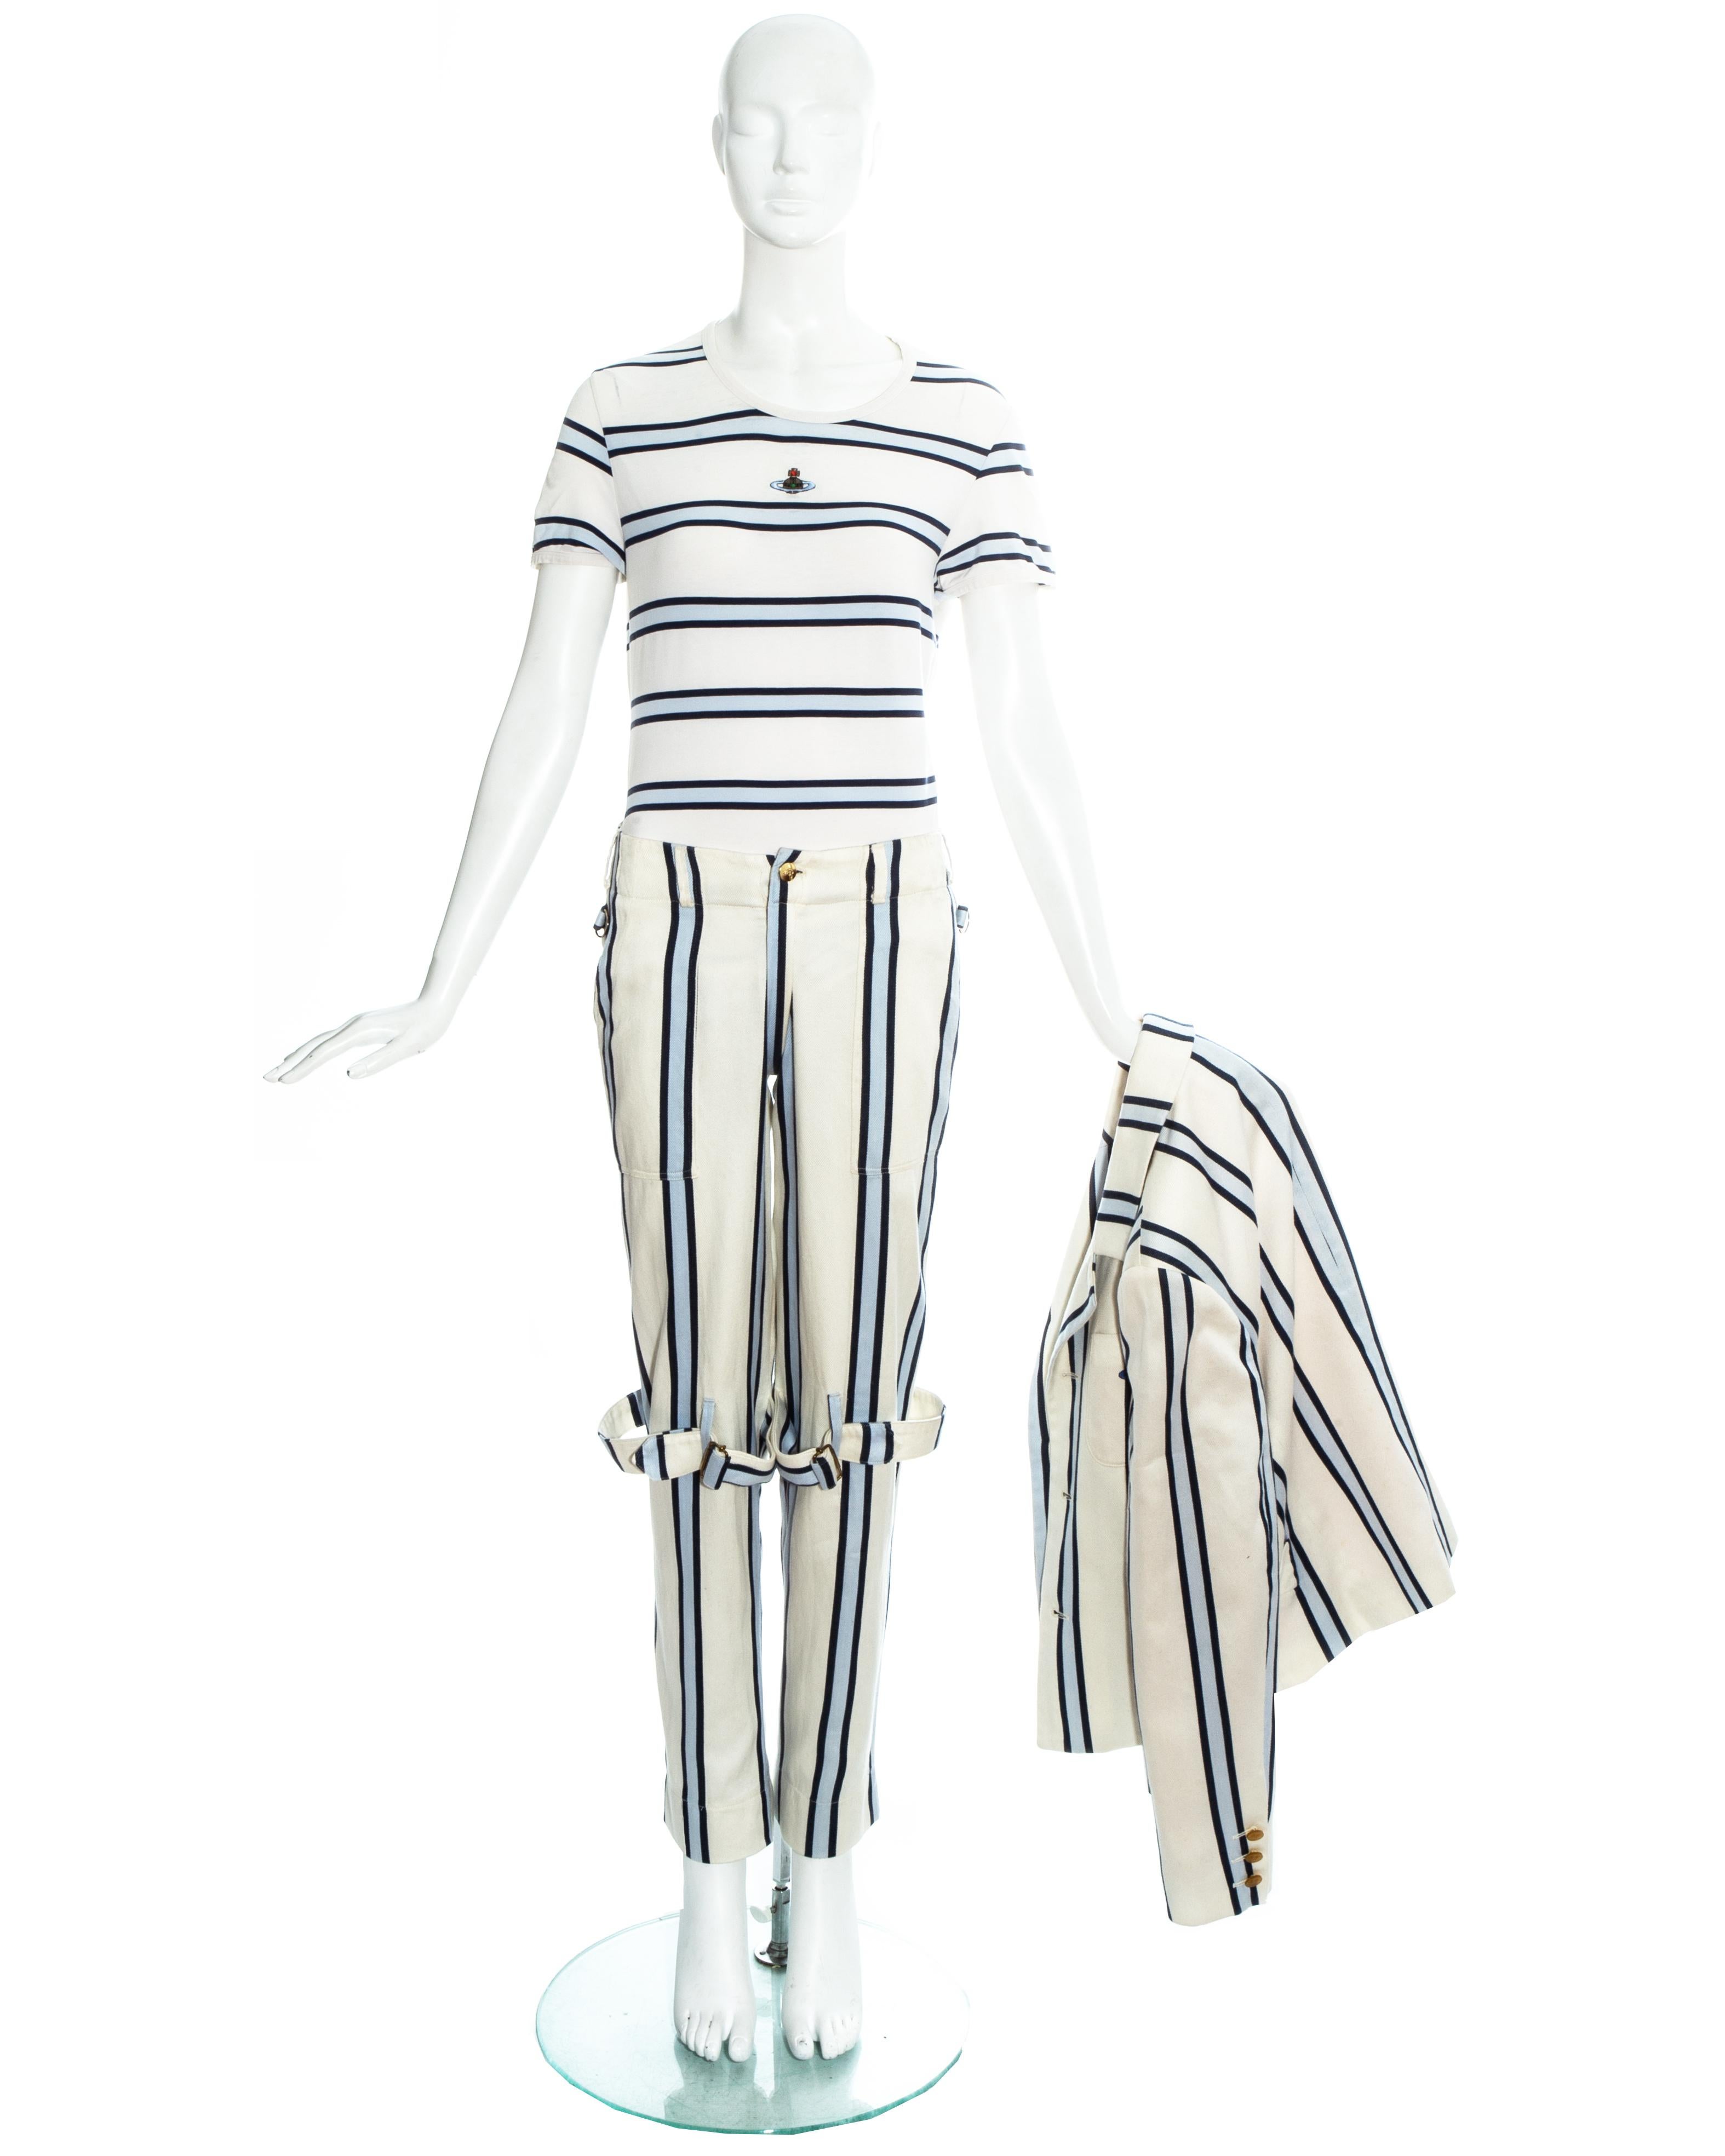 Vivienne Westwood unisex blue and white striped cotton 'Cafe Society' 3 piece pant suit. Singled breasted blazer jacket with embroidered orb on patch pocket, slim fit pants with bondage straps and signature zipper crotch, sold with a matching jersey